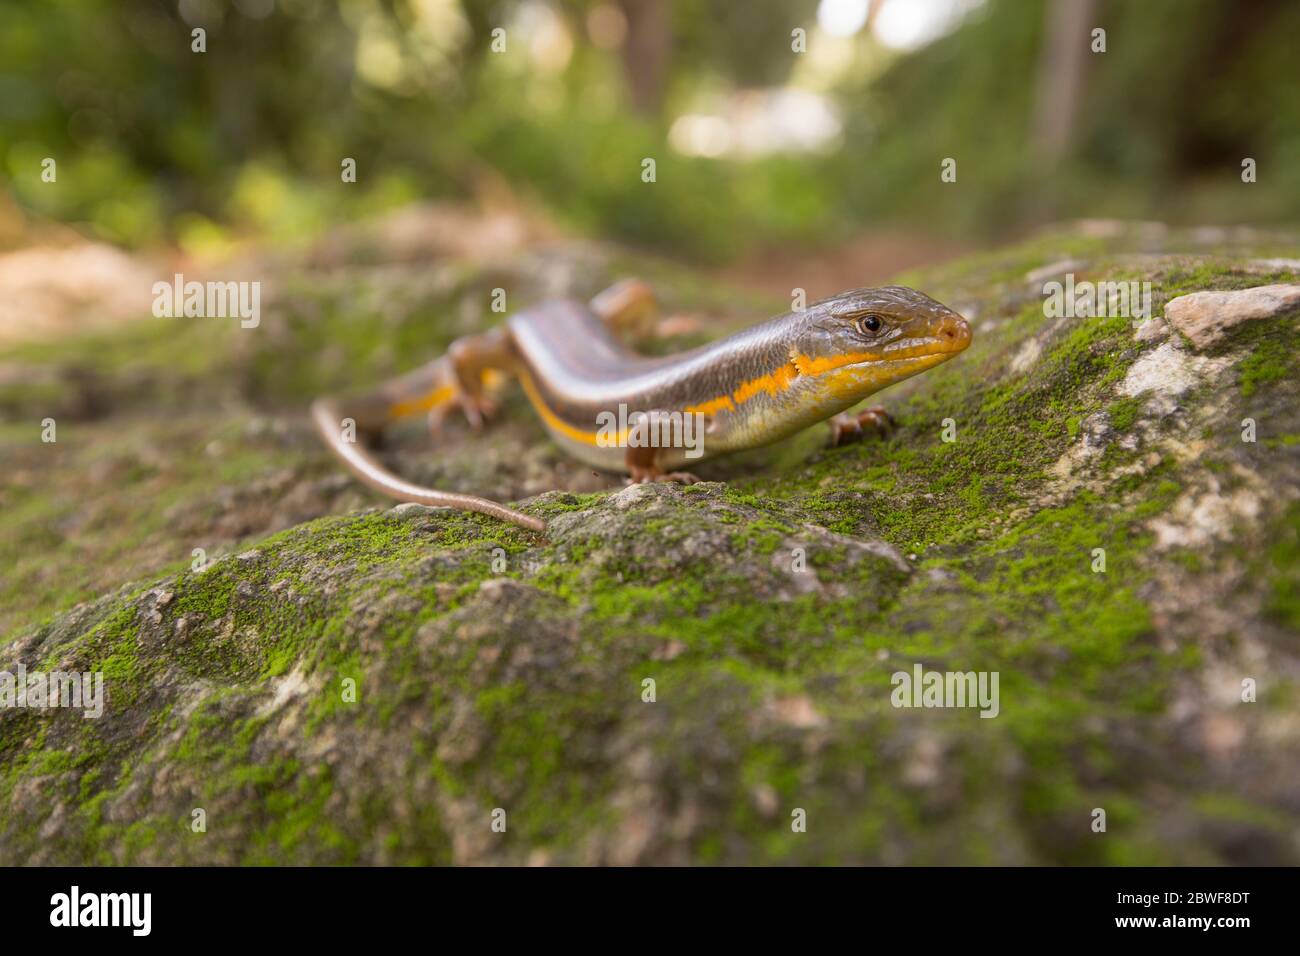 Bridled mabuya or Bridled skink (Trachylepis vittata) climbs a tree Photographed at the Ein Afek nature reserve, Israel in February Stock Photo